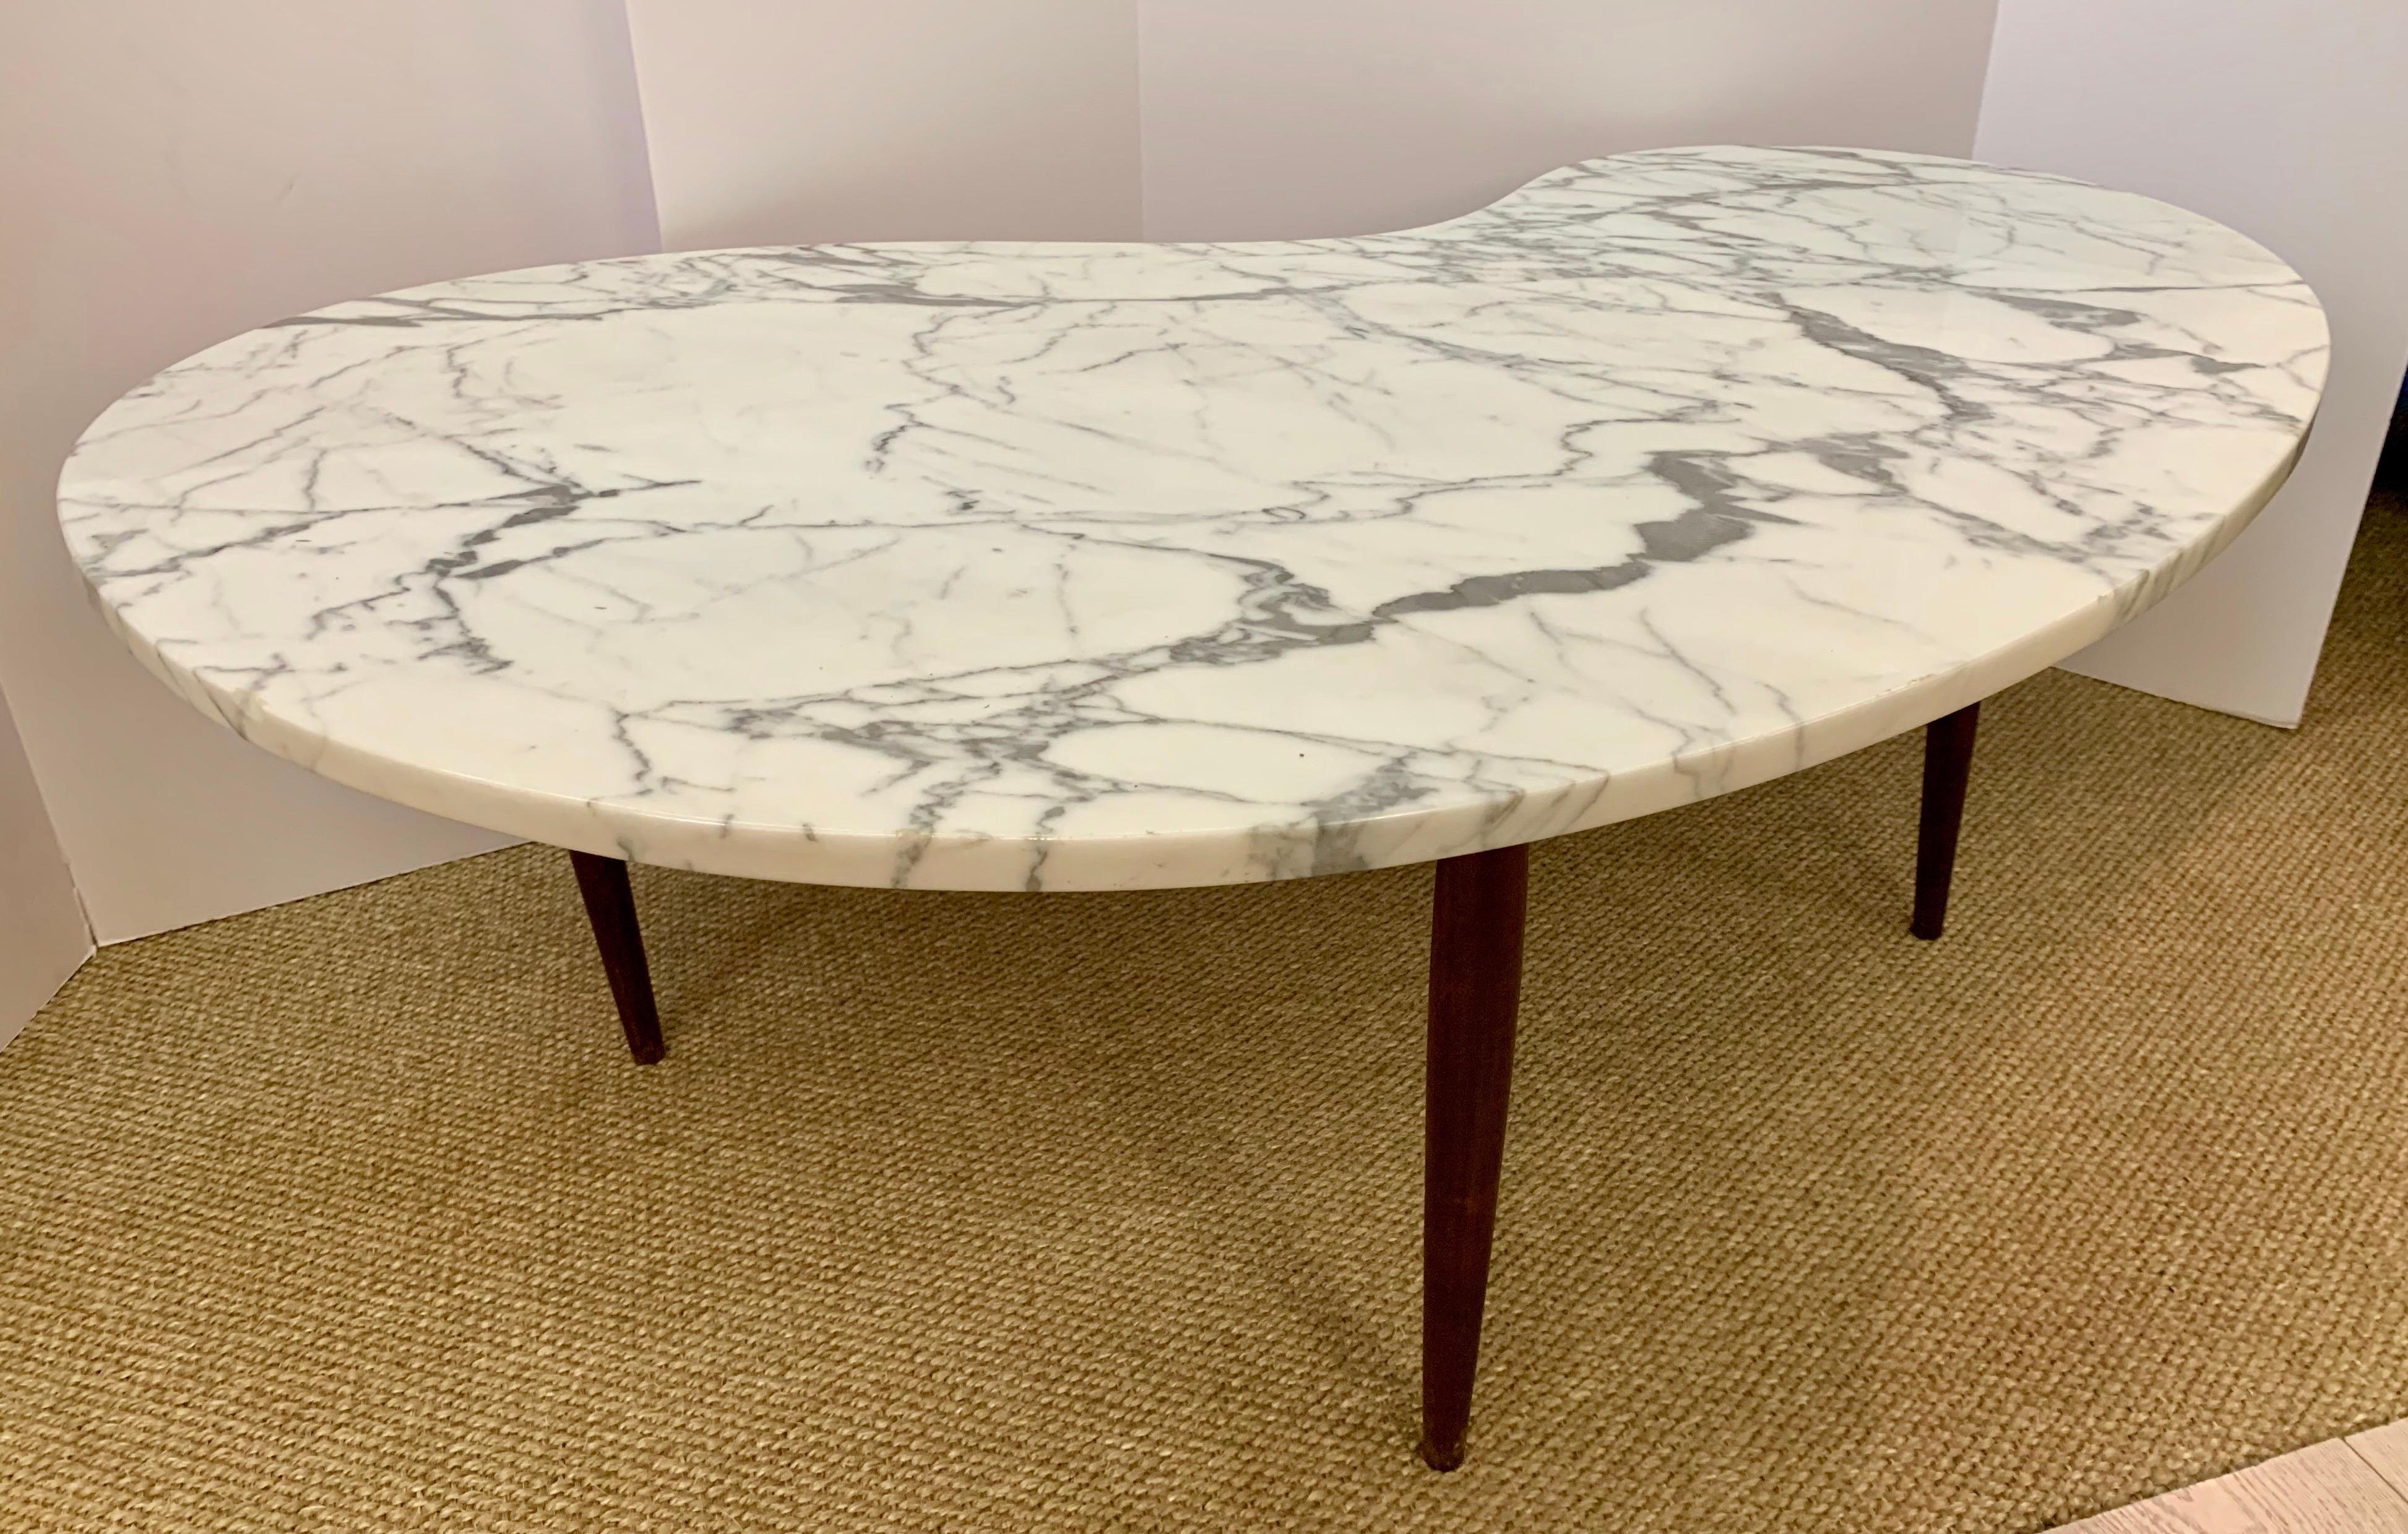 Iconic Danish Mid-Century Modern kidney shaped cocktail table with sculptural marble top.